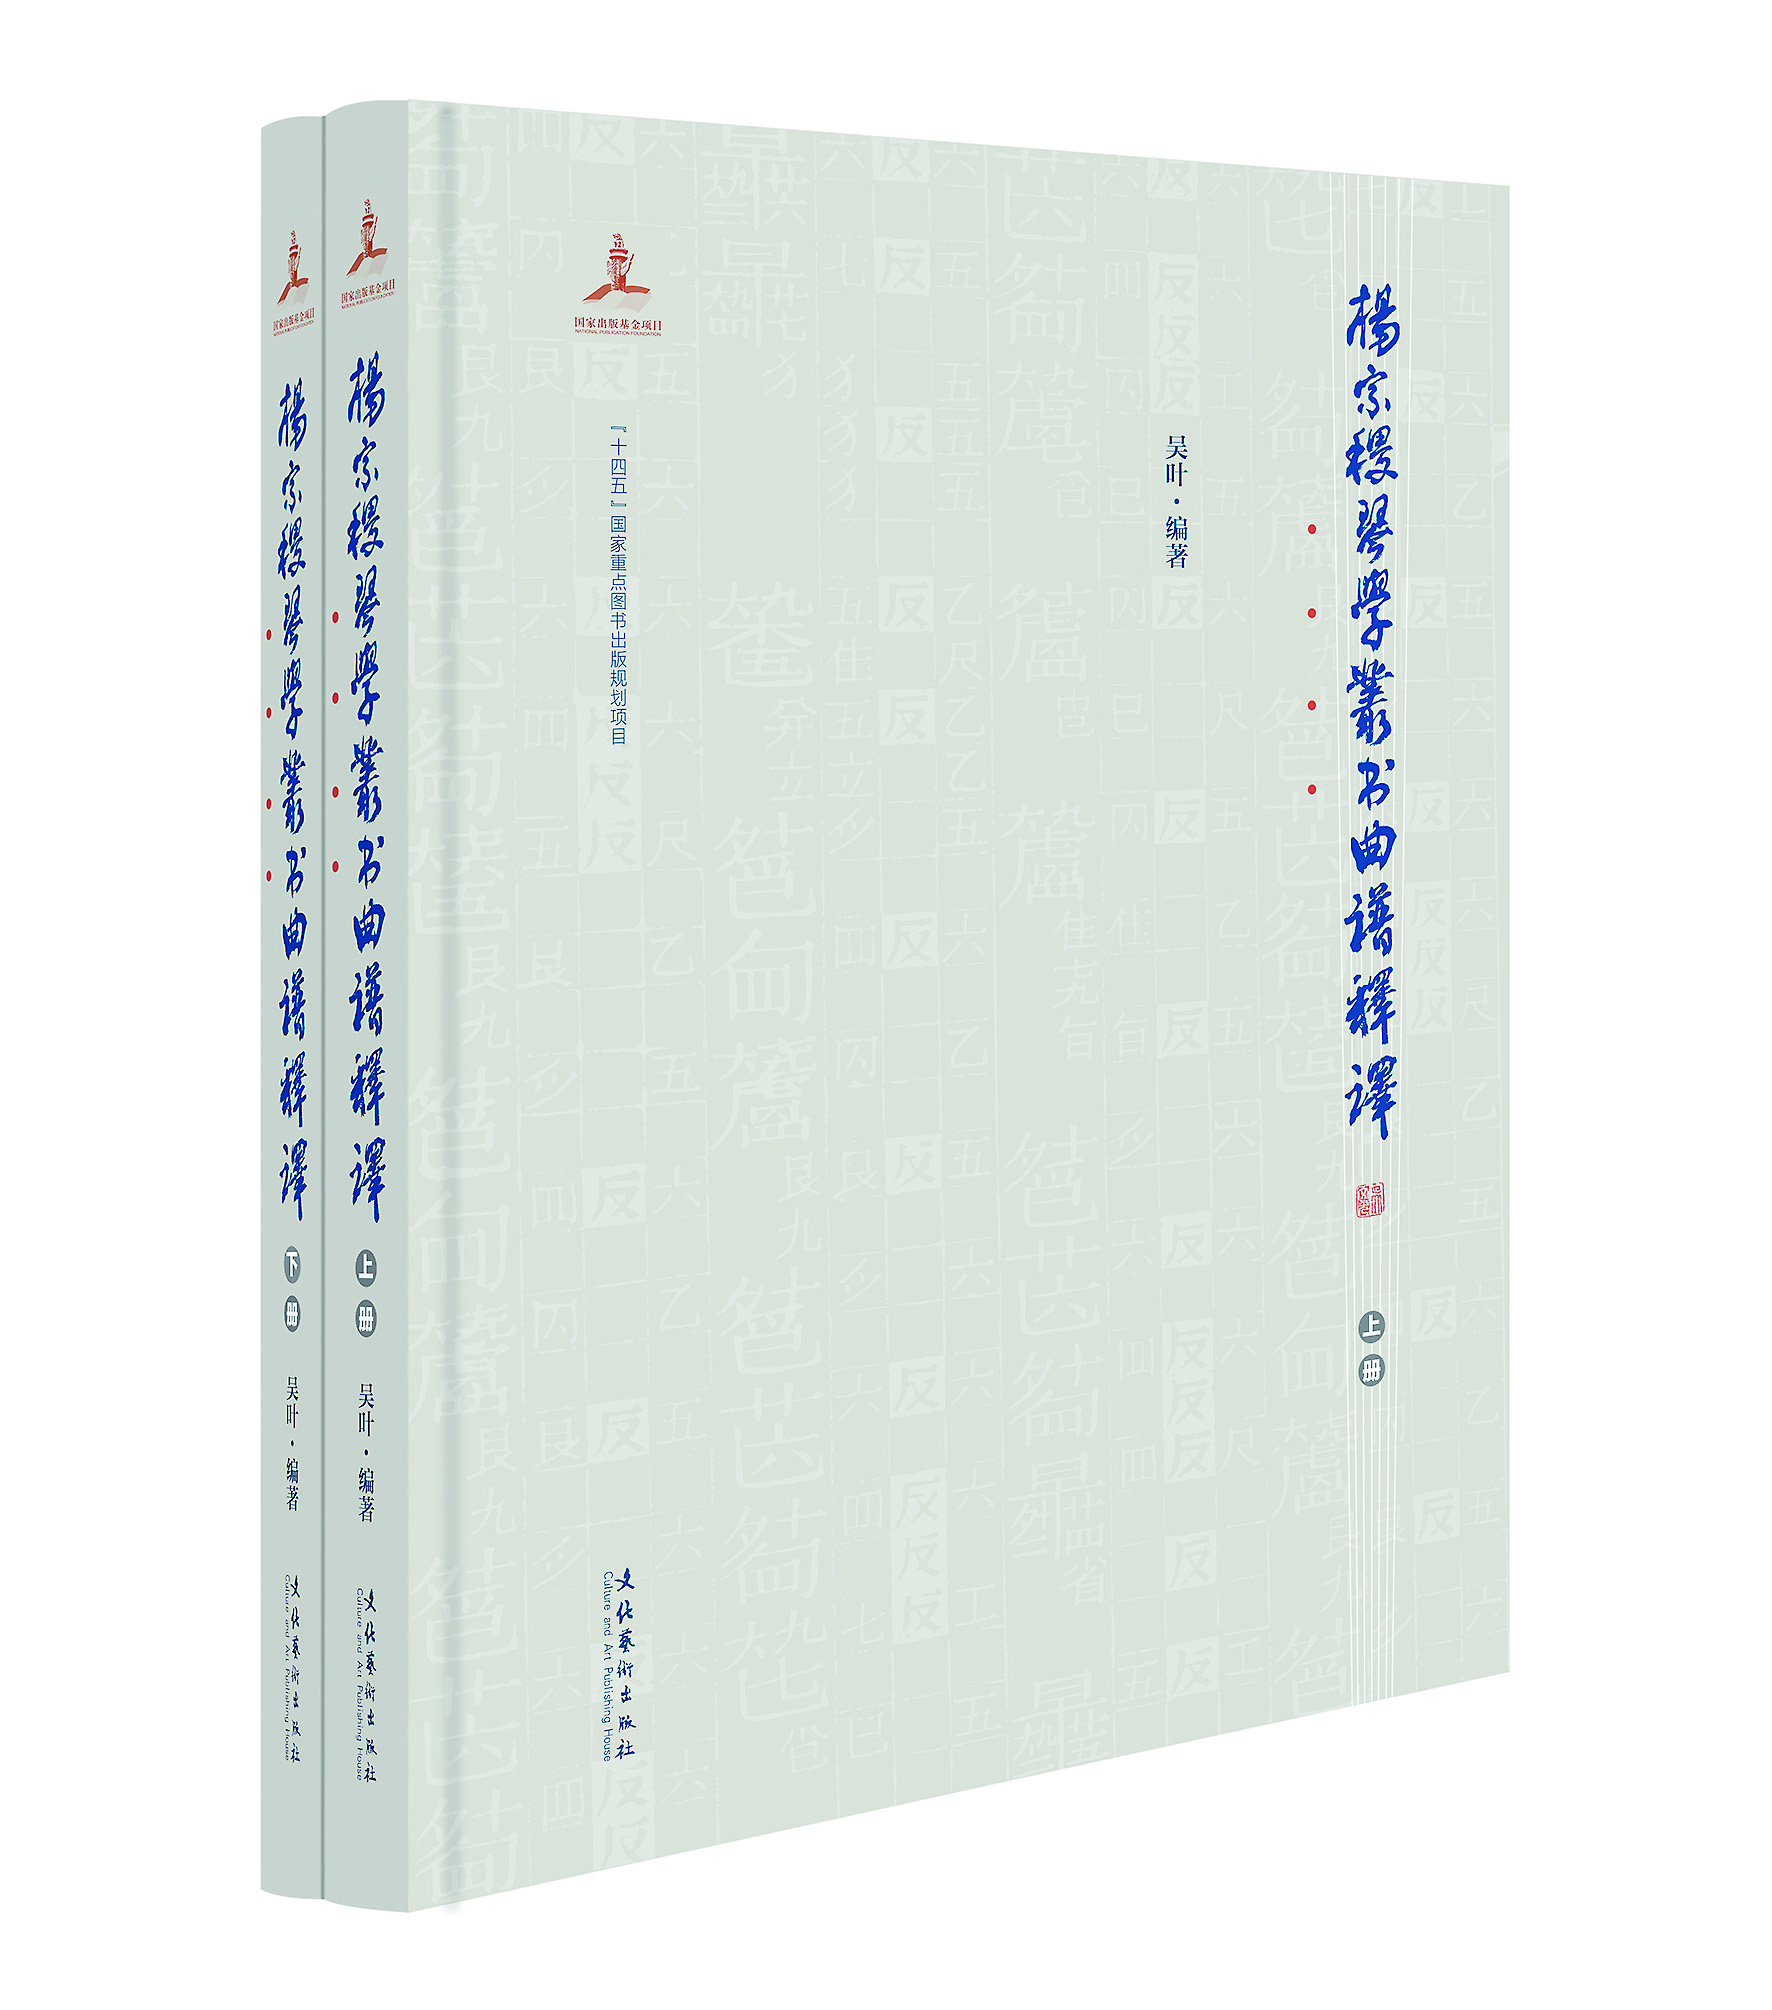 Wu Ye is the author of Yang Zongji's Musical Score Interpretation of Qin Studies Series, which will be published soon